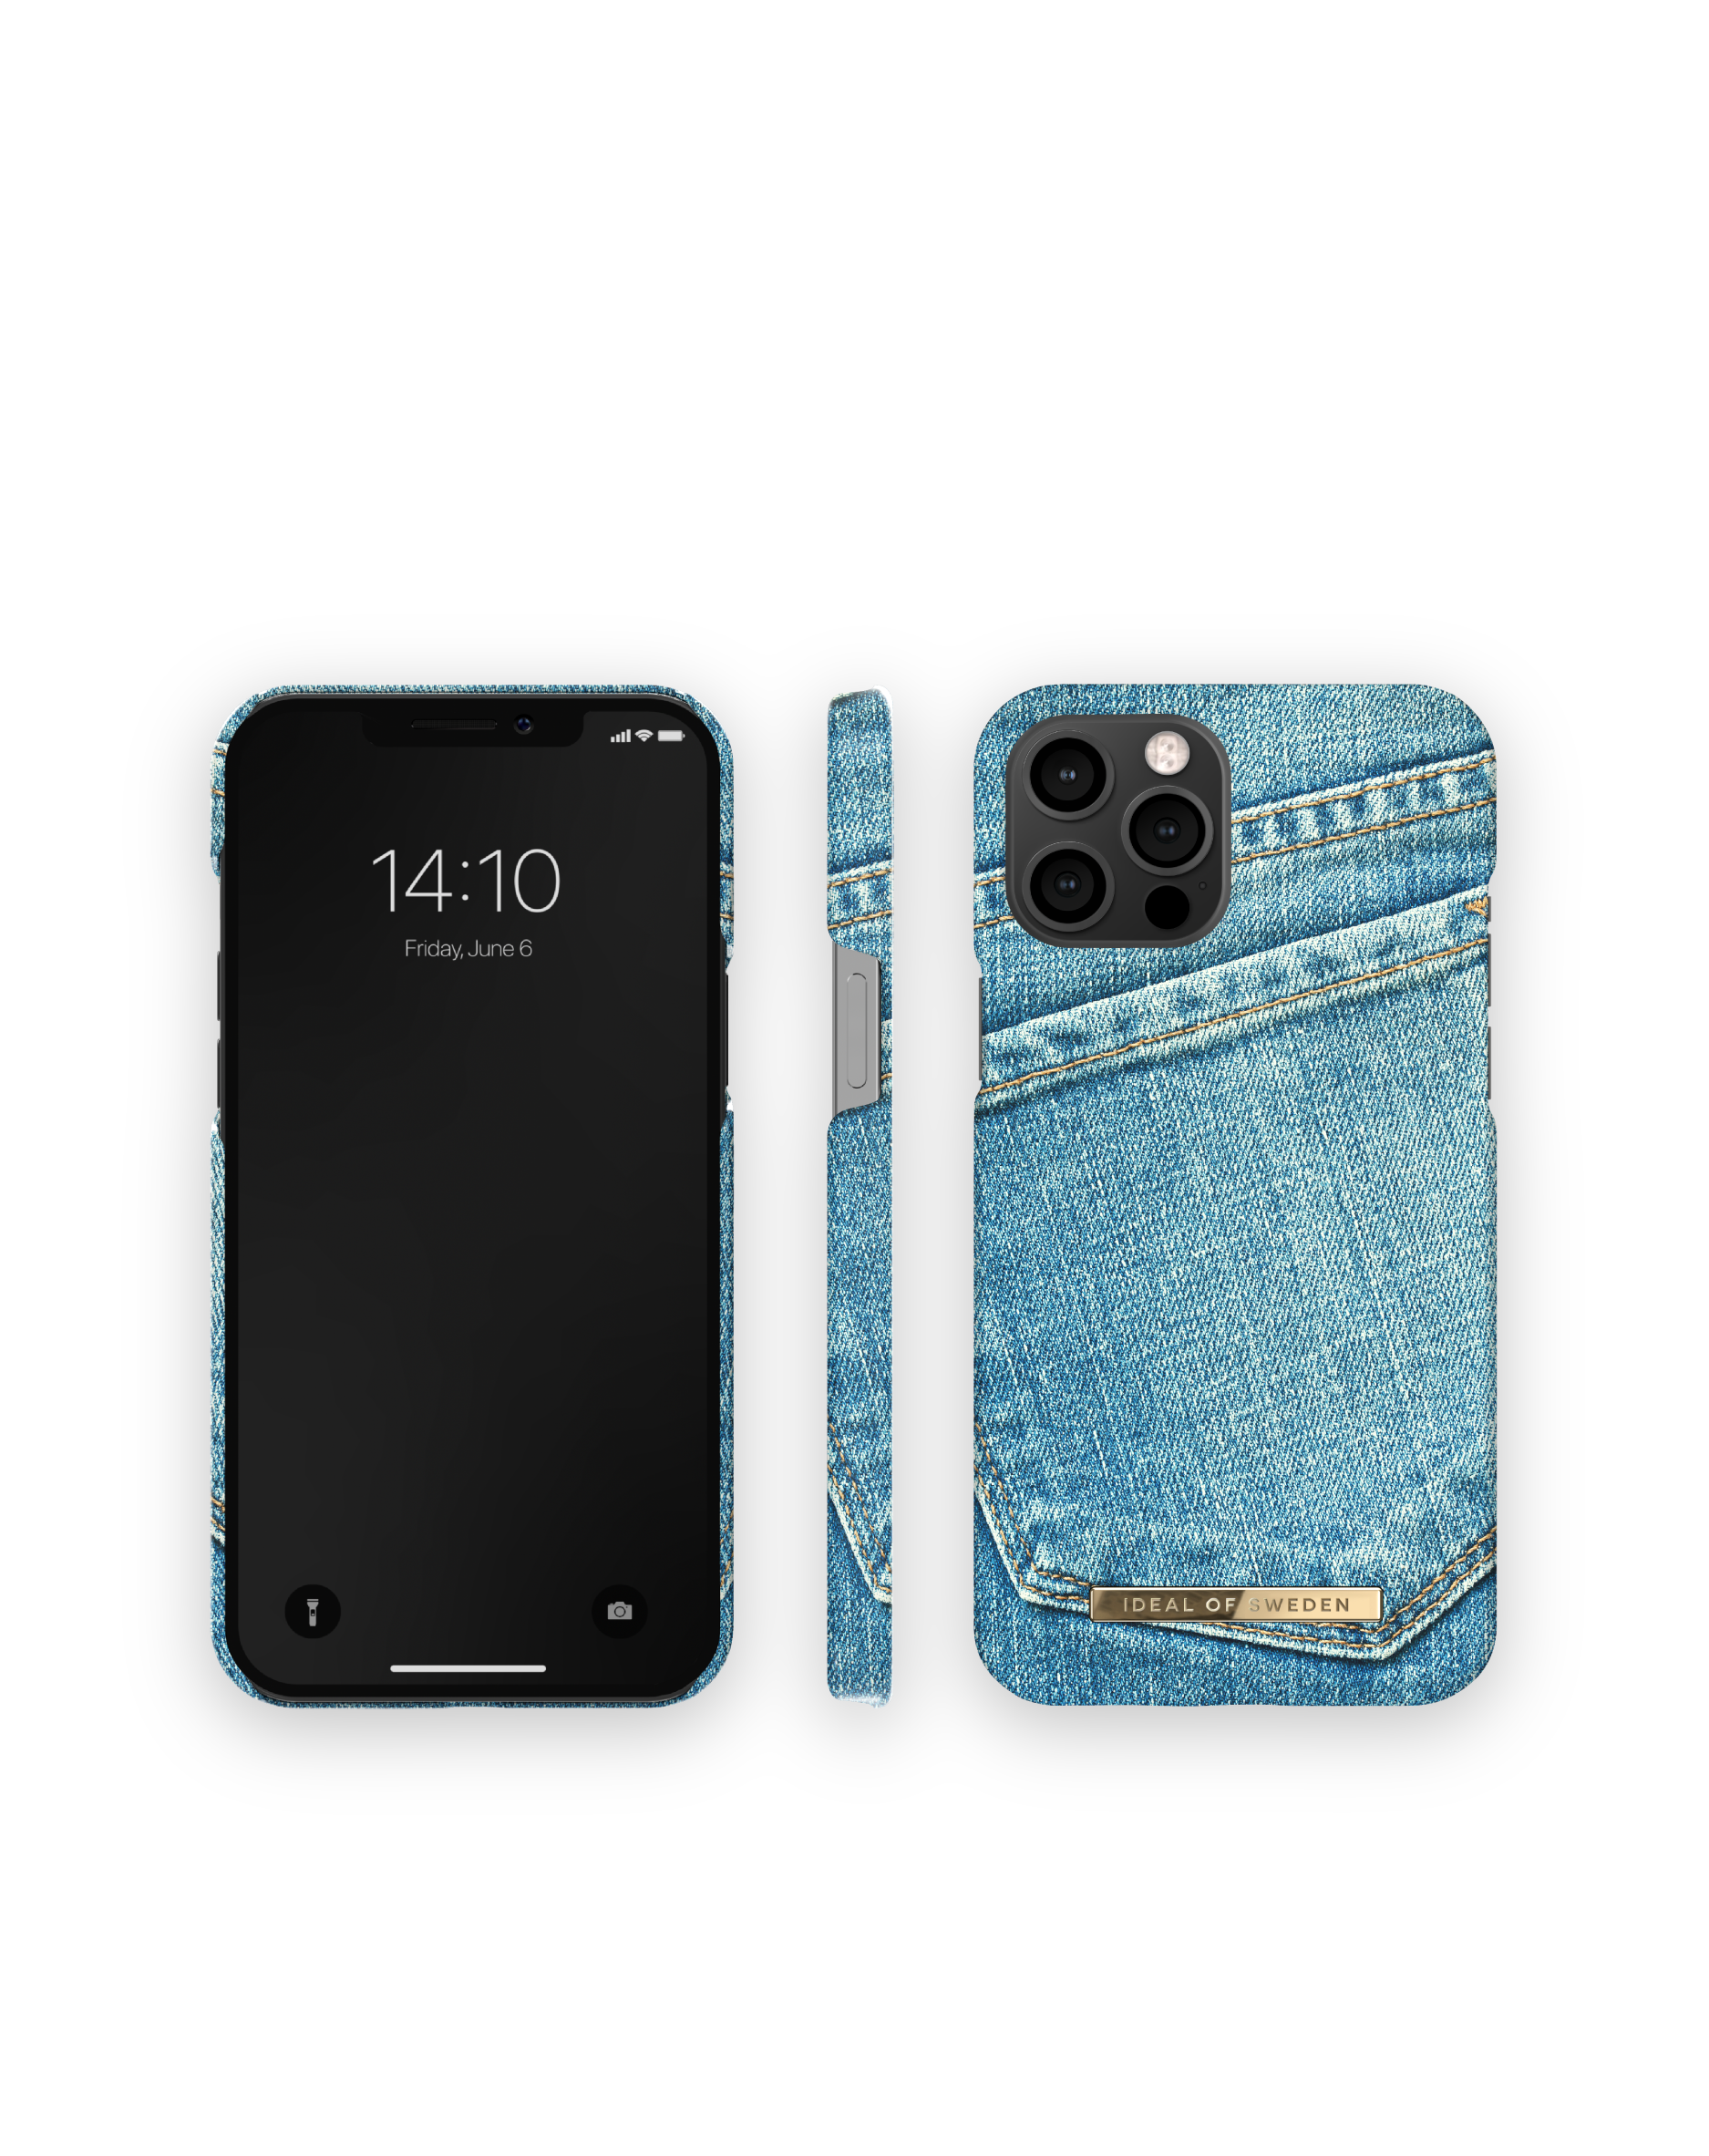 Denim SWEDEN OF Backcover, Pro Apple, IDFCSS22-I2067-413, IDEAL Max, Bliss (Ltd) iPhone 12